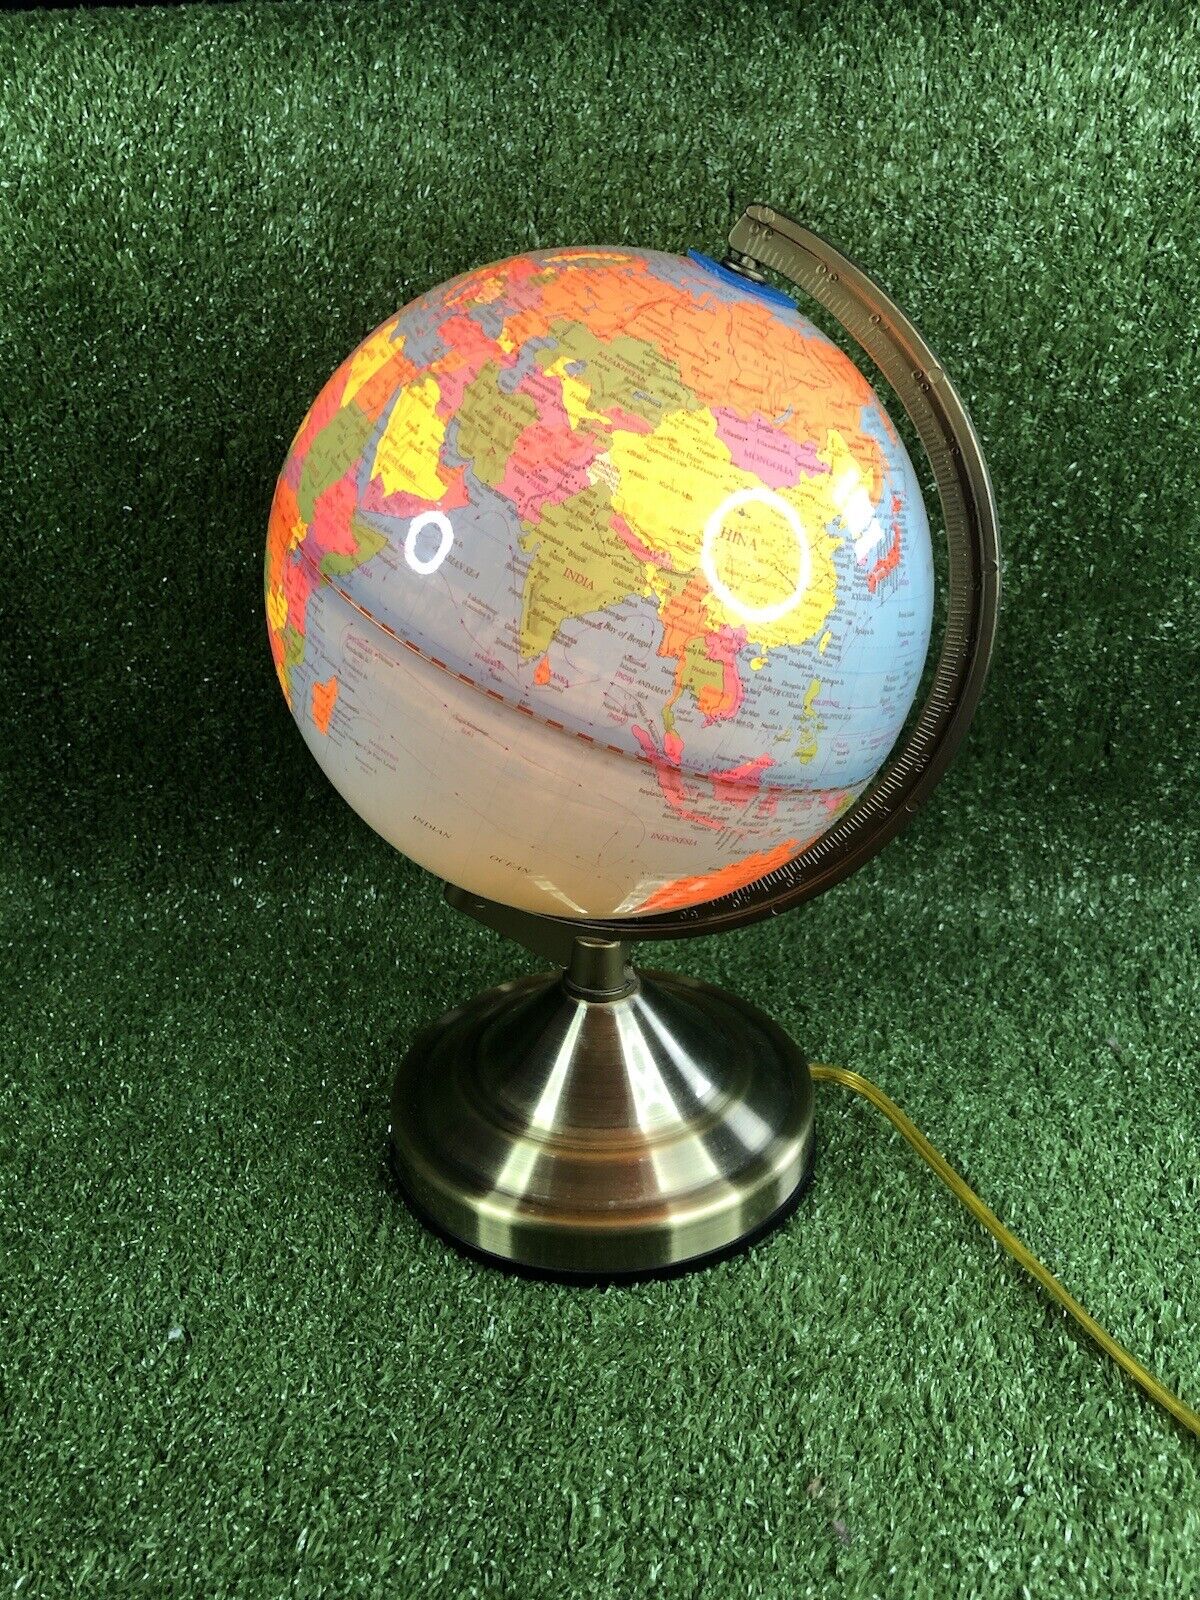 Vintage Portable Luminaire Lamp Earth Globe Spinning Axis Works New Bulb